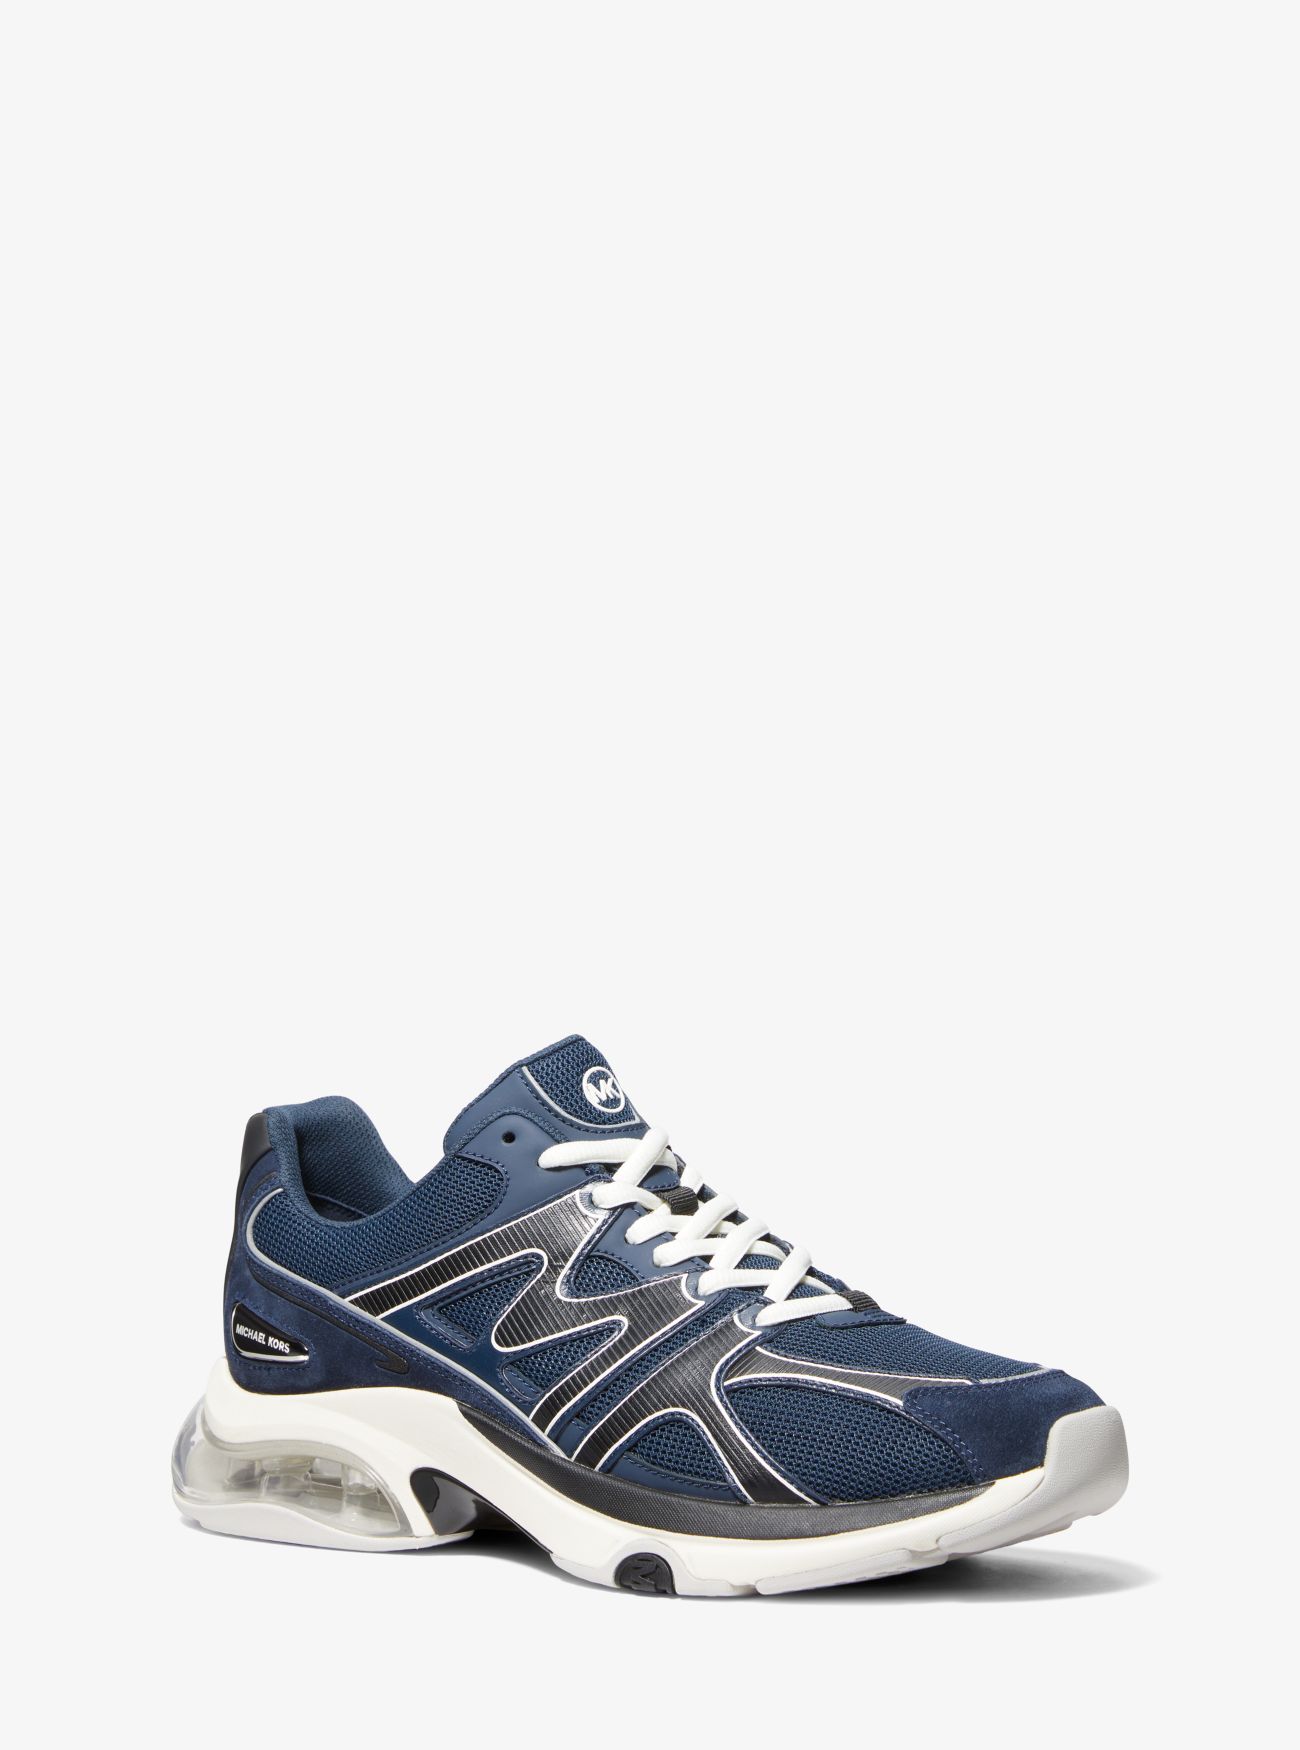 MK Kit Extreme Mesh and Leather Trainer - Navy Multi - Michael Kors